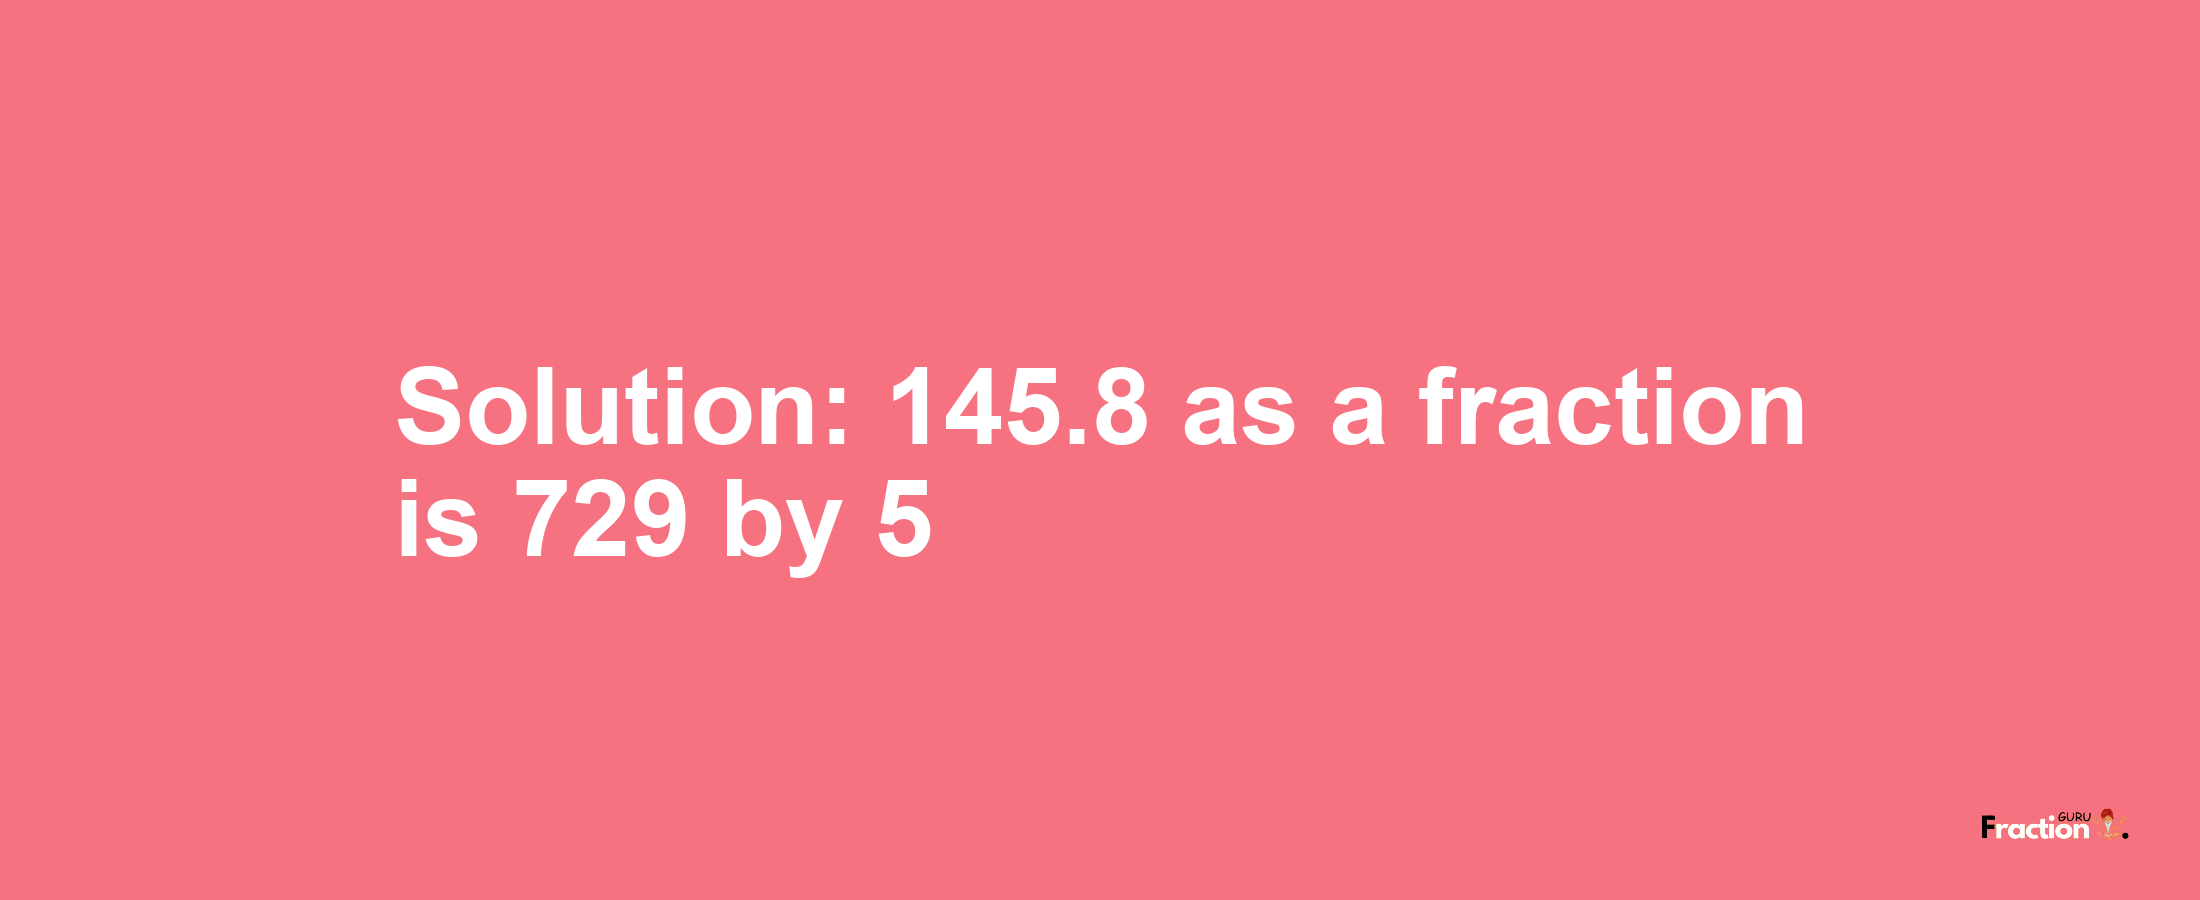 Solution:145.8 as a fraction is 729/5